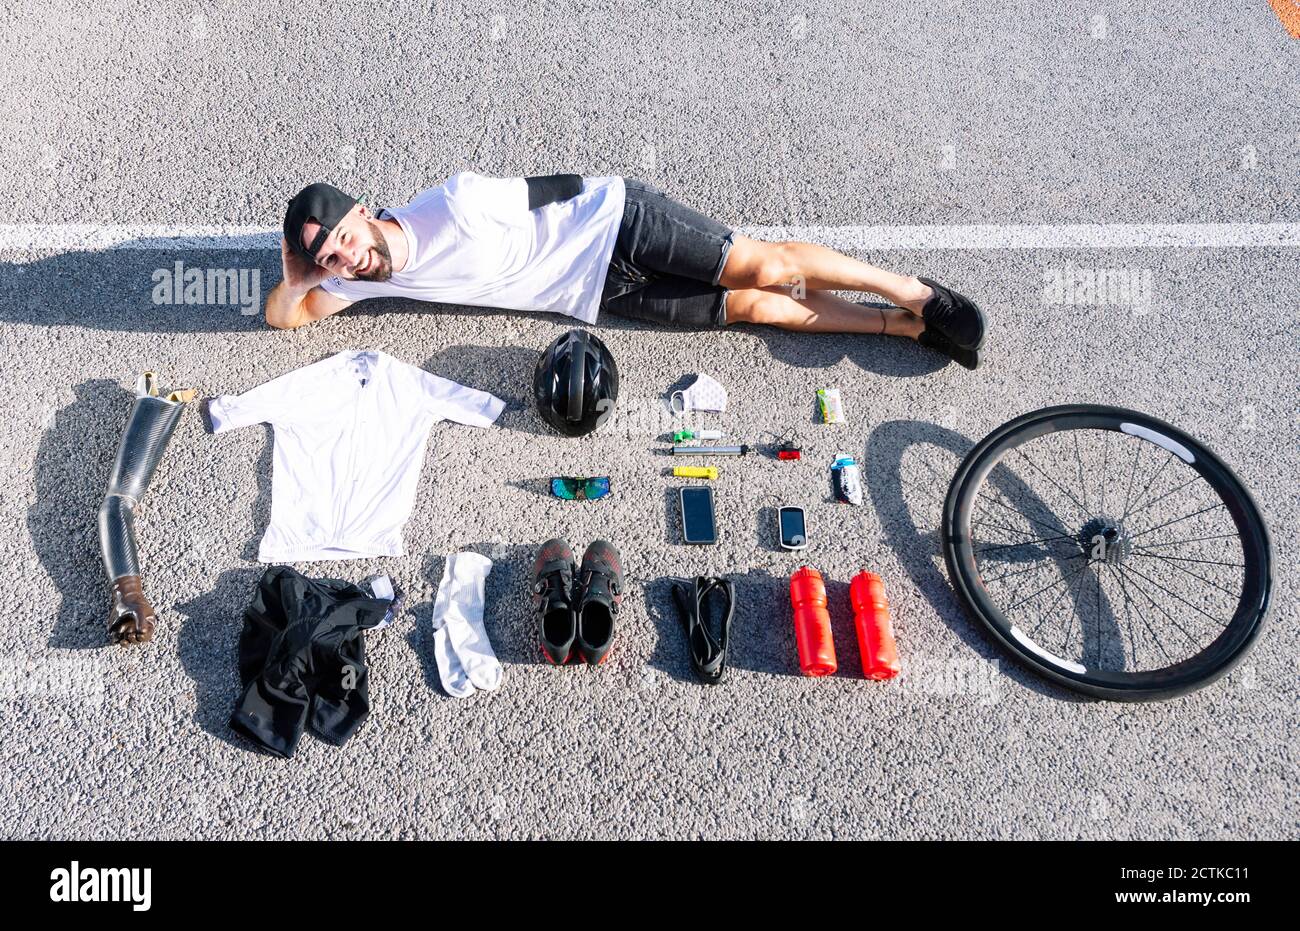 Smiling male adaptive athlete with various objects lying on road Stock Photo